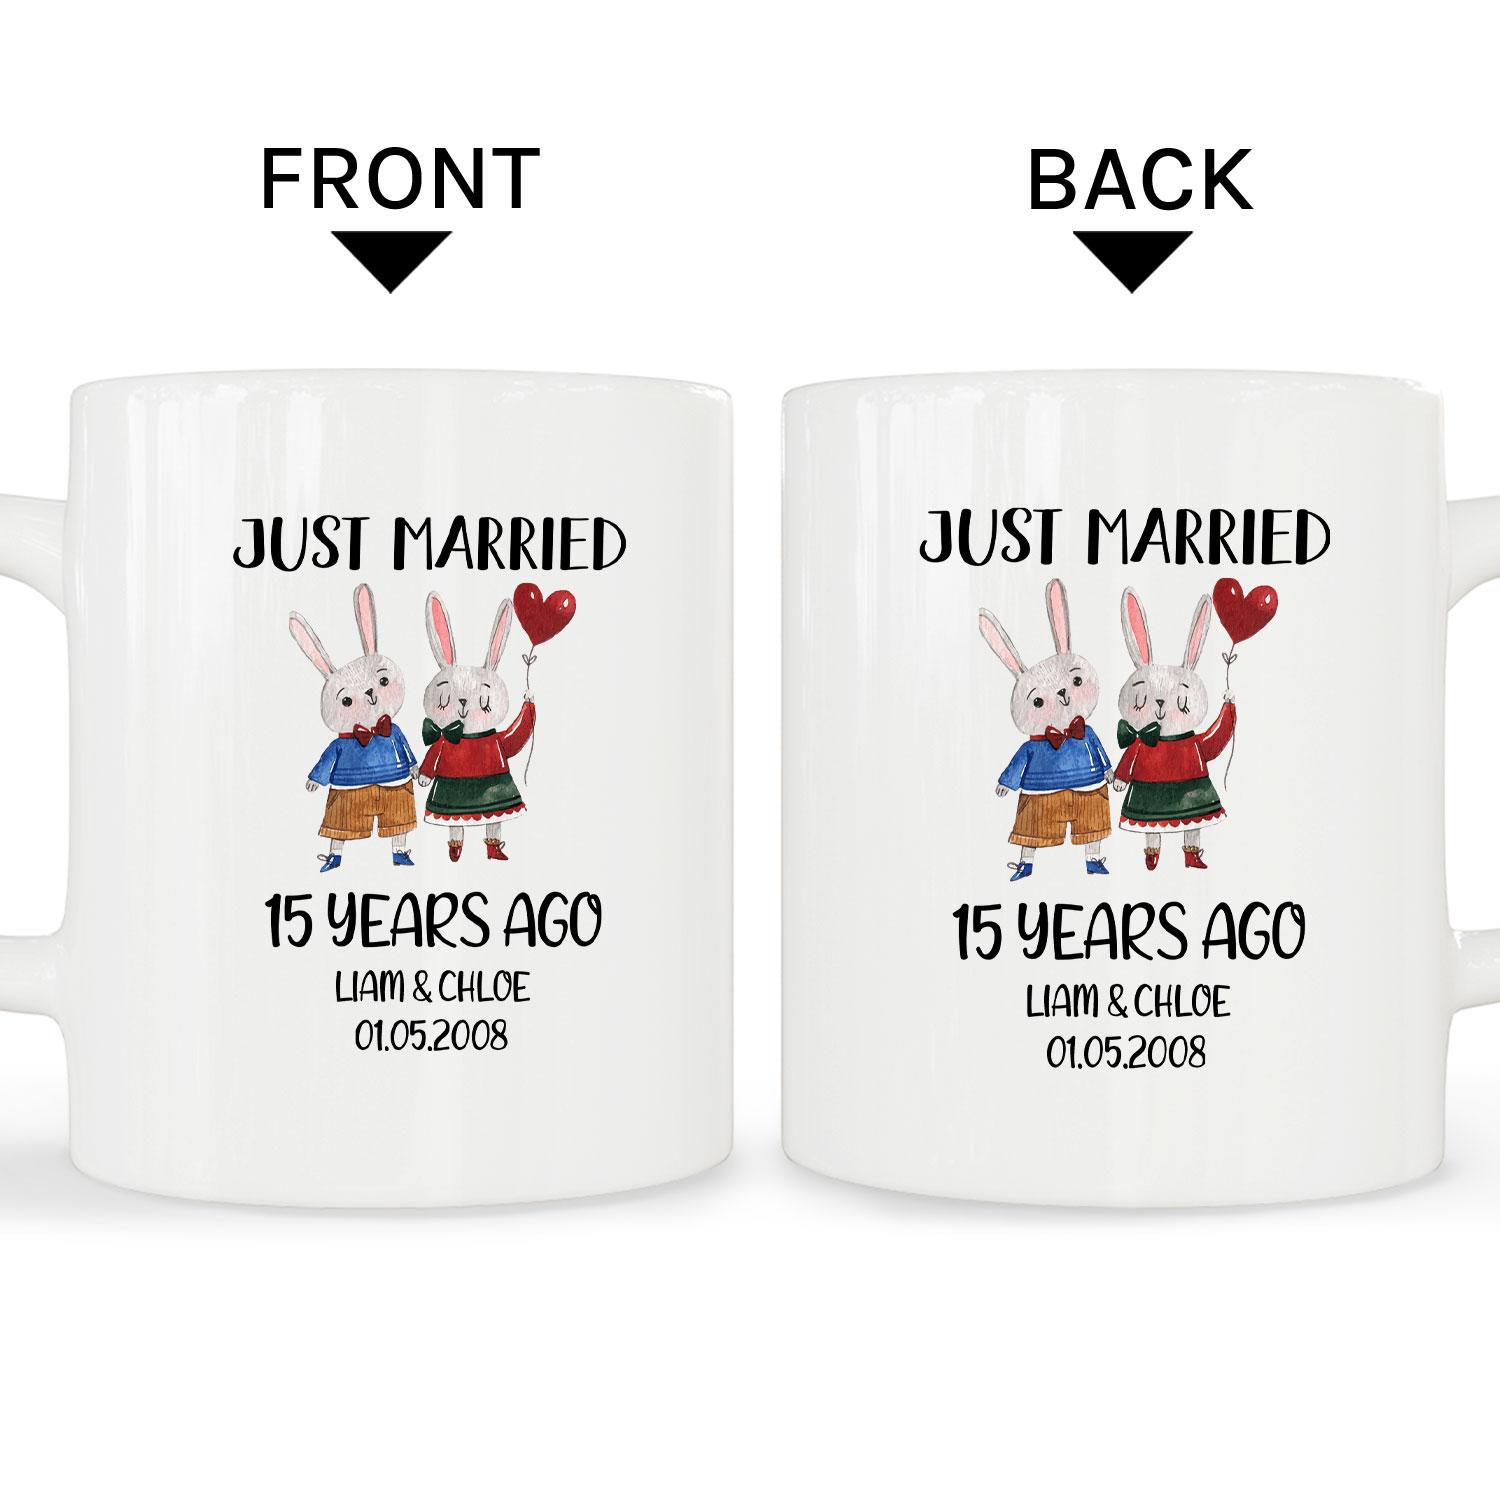 Just Married 15 Years Ago - Personalized 15 Year Anniversary gift for him for her - Custom Mug - MyMindfulGifts